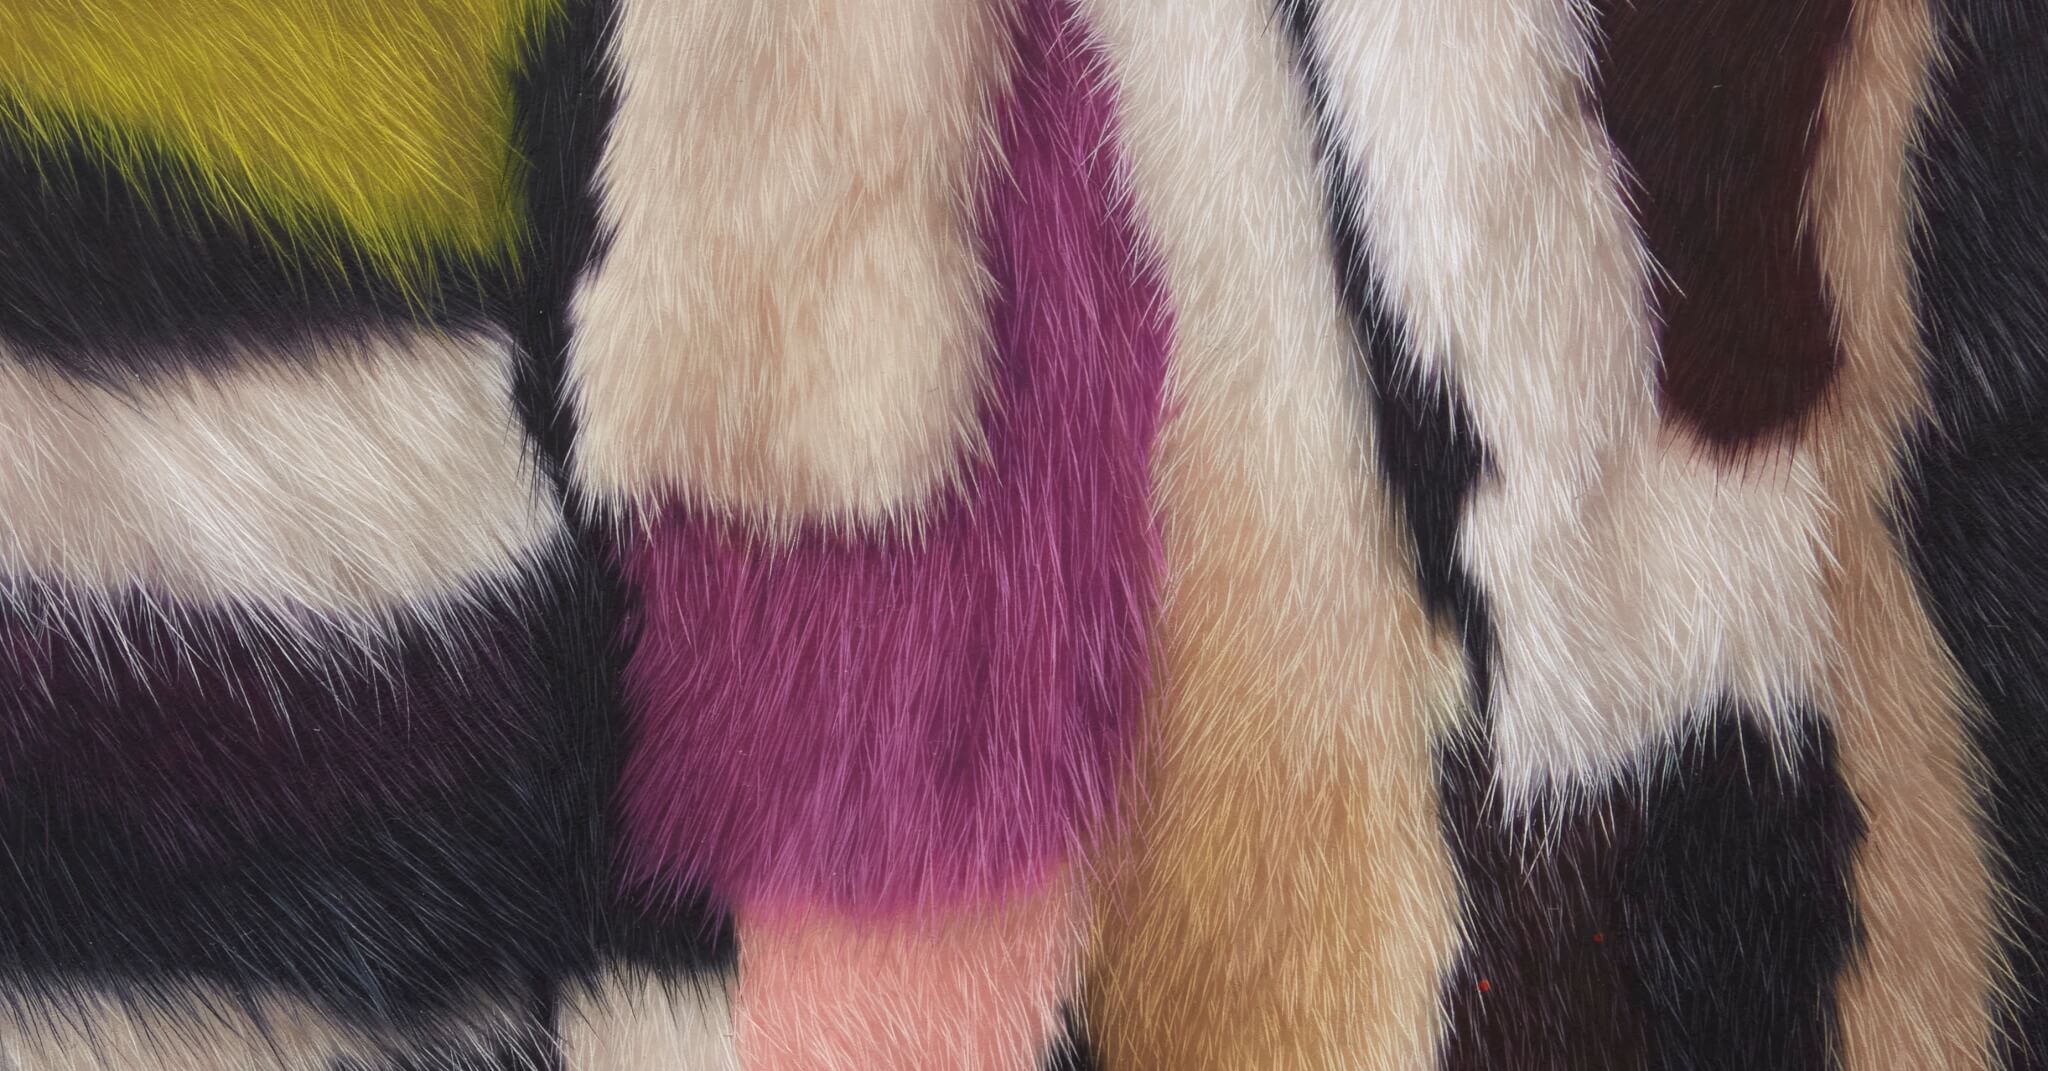 A detail of a small oil painting of colorful fur in swatches of yellow, purple, pink, beige, black, and white. Each hair is visible, creating a hyper-realistic portrayal.